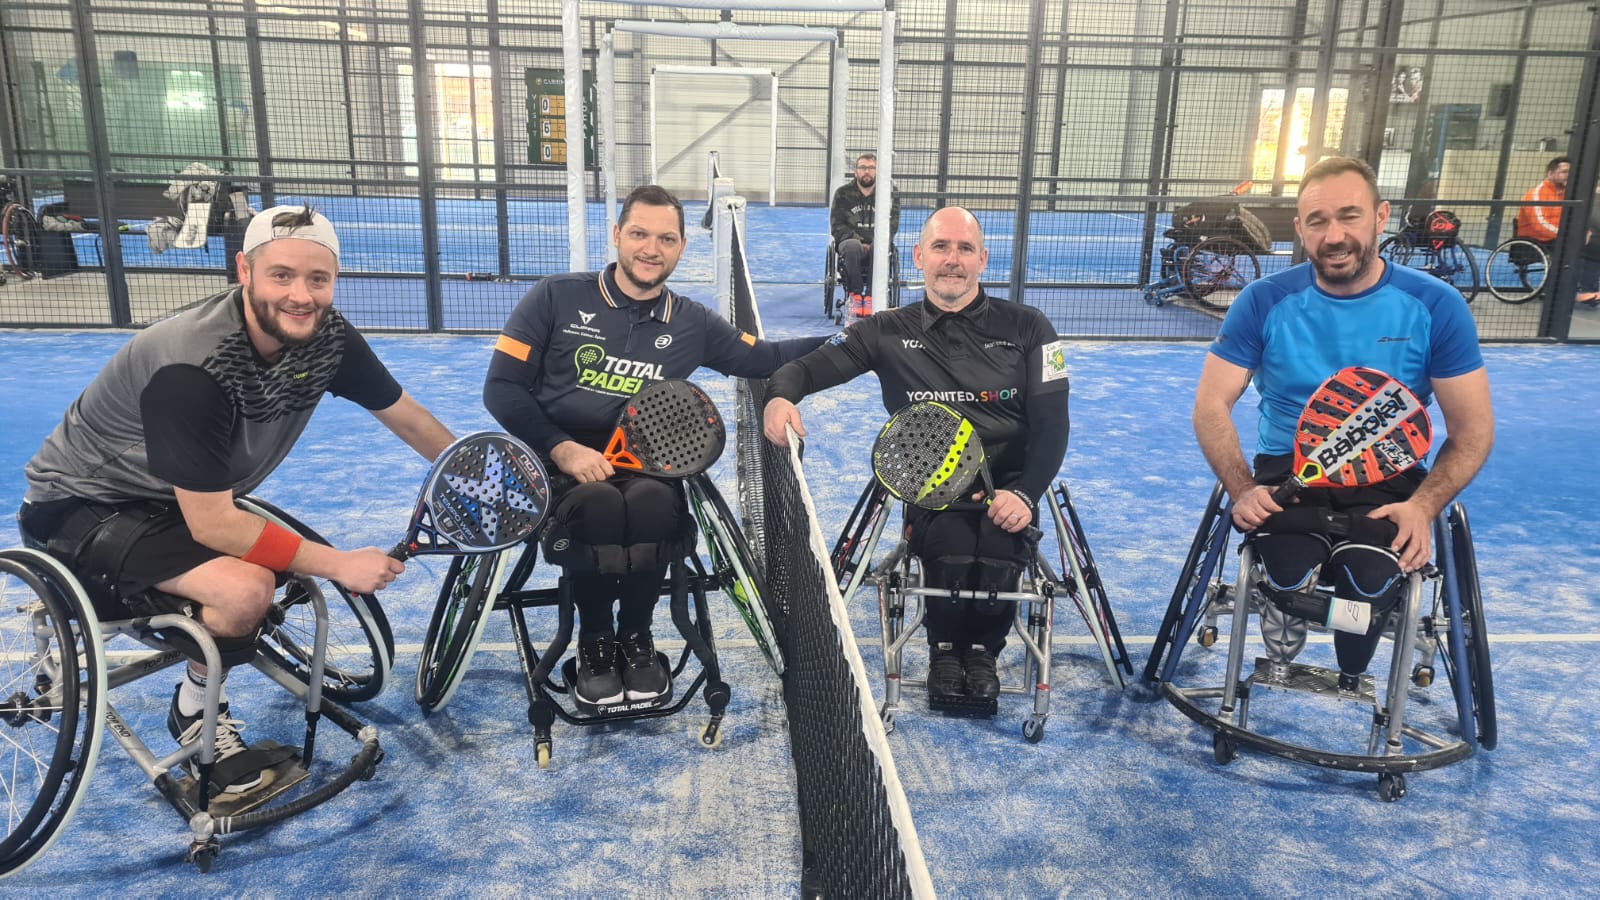 Open Padel-Fauteuil Jarville – Husser-Walther / Matthias Bergs déroule !